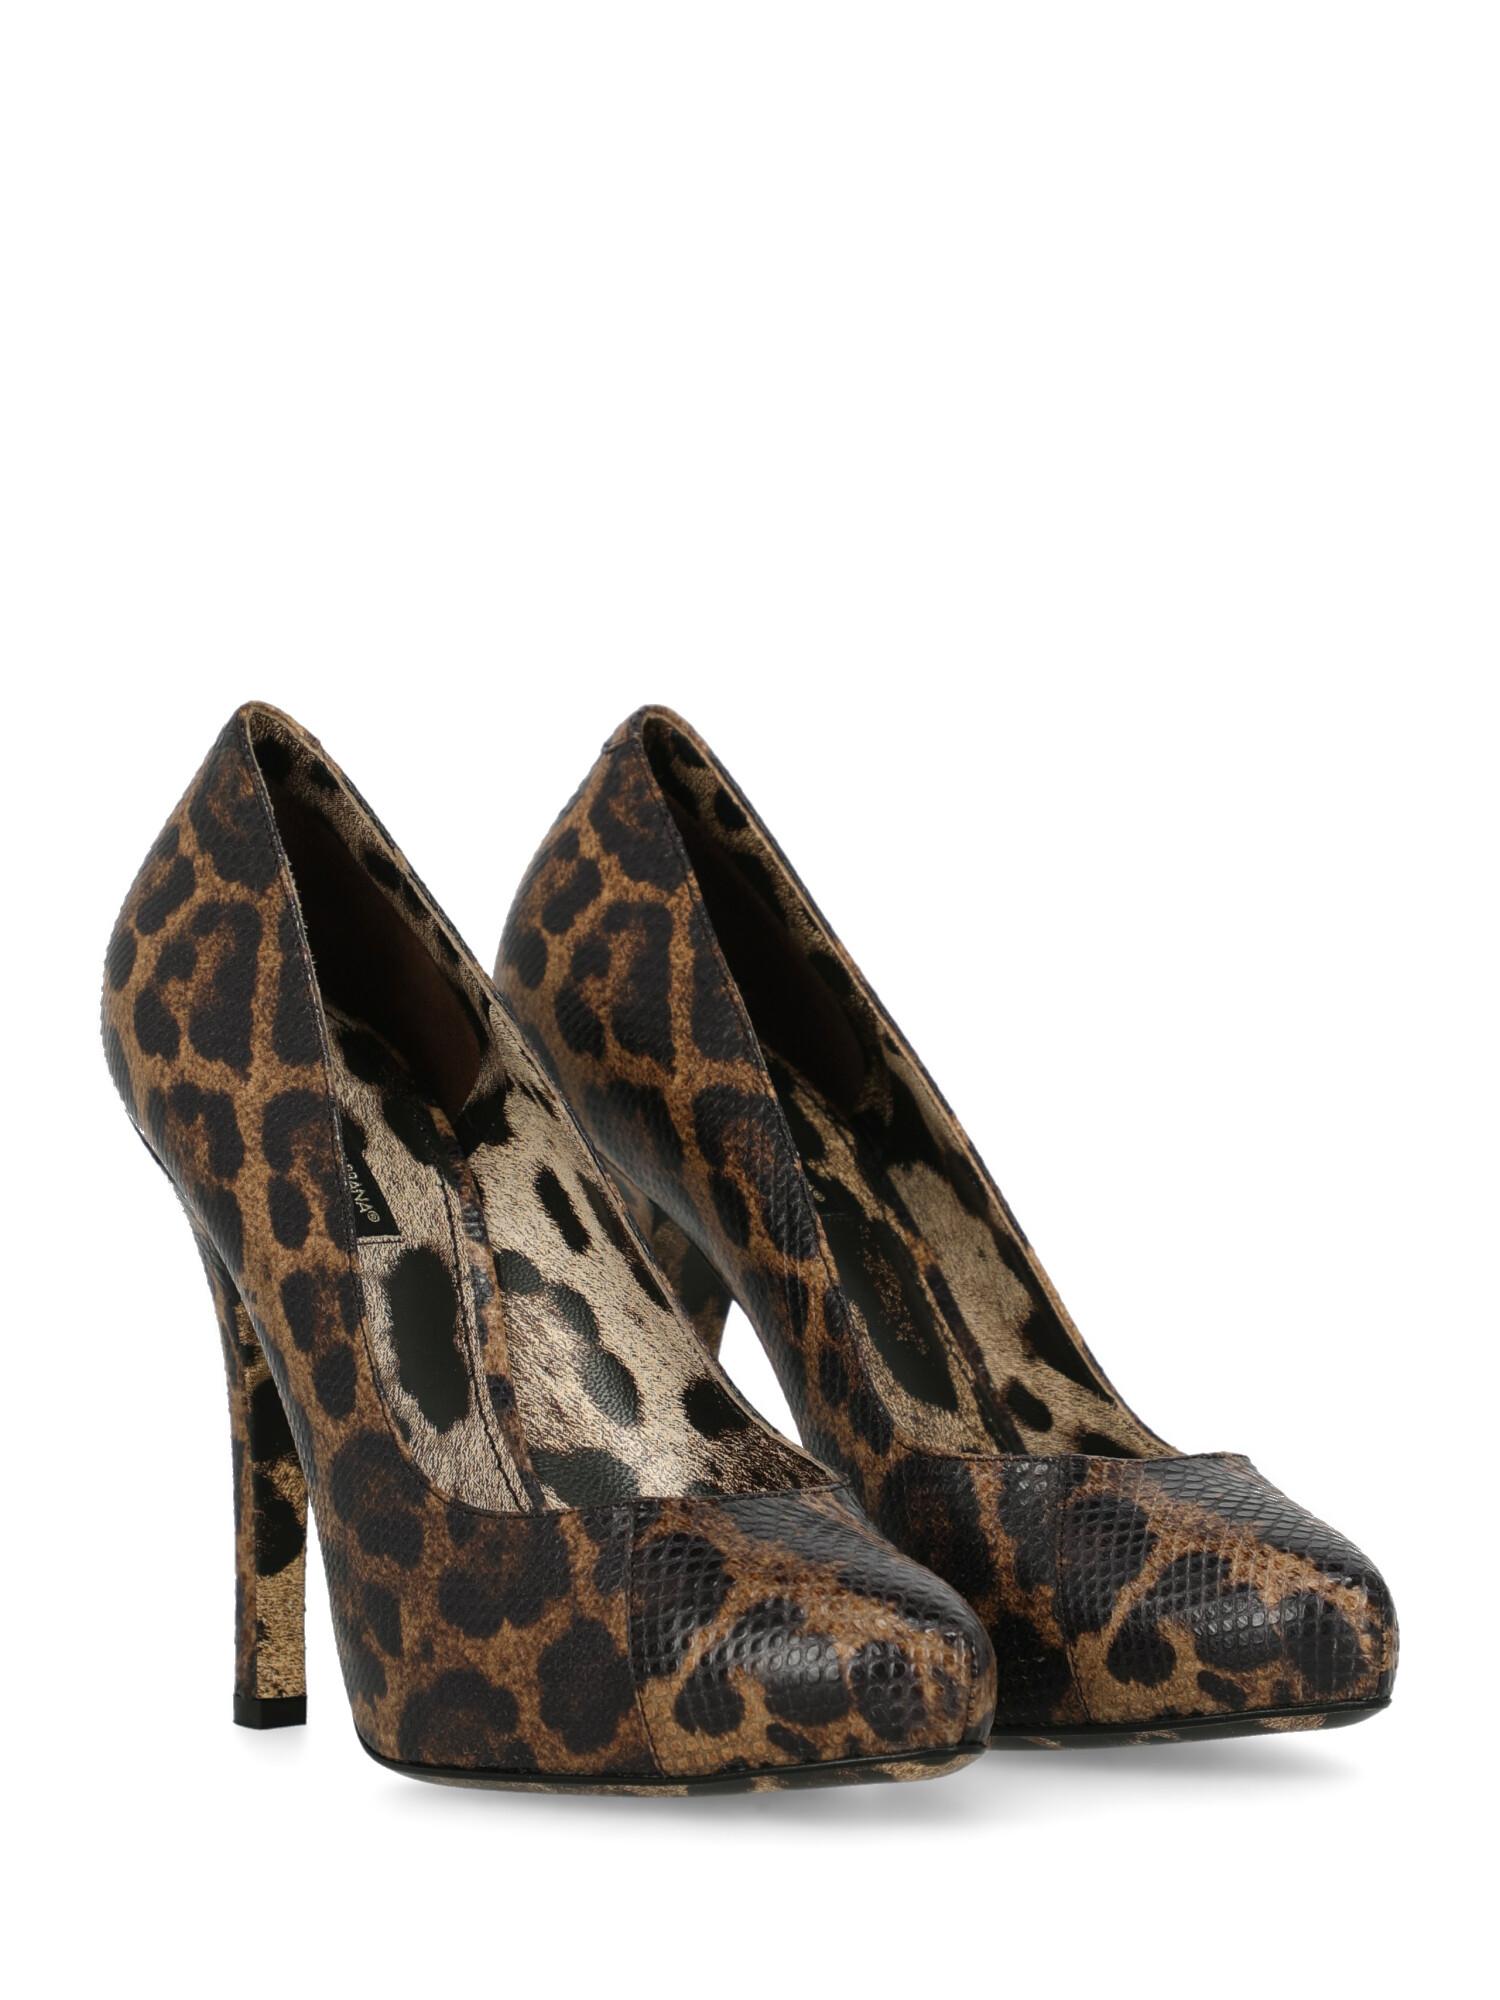 Shoe, leather, animal print, pointed toe, branded insole, tapered heel, high heel.

Includes:
- Dust bag
- Box

Product Condition: Excellent

Measurements:
Heel height: 12 cm

Composition:
Upper: 100% Leather

Color: Beige/Black
Product ID: